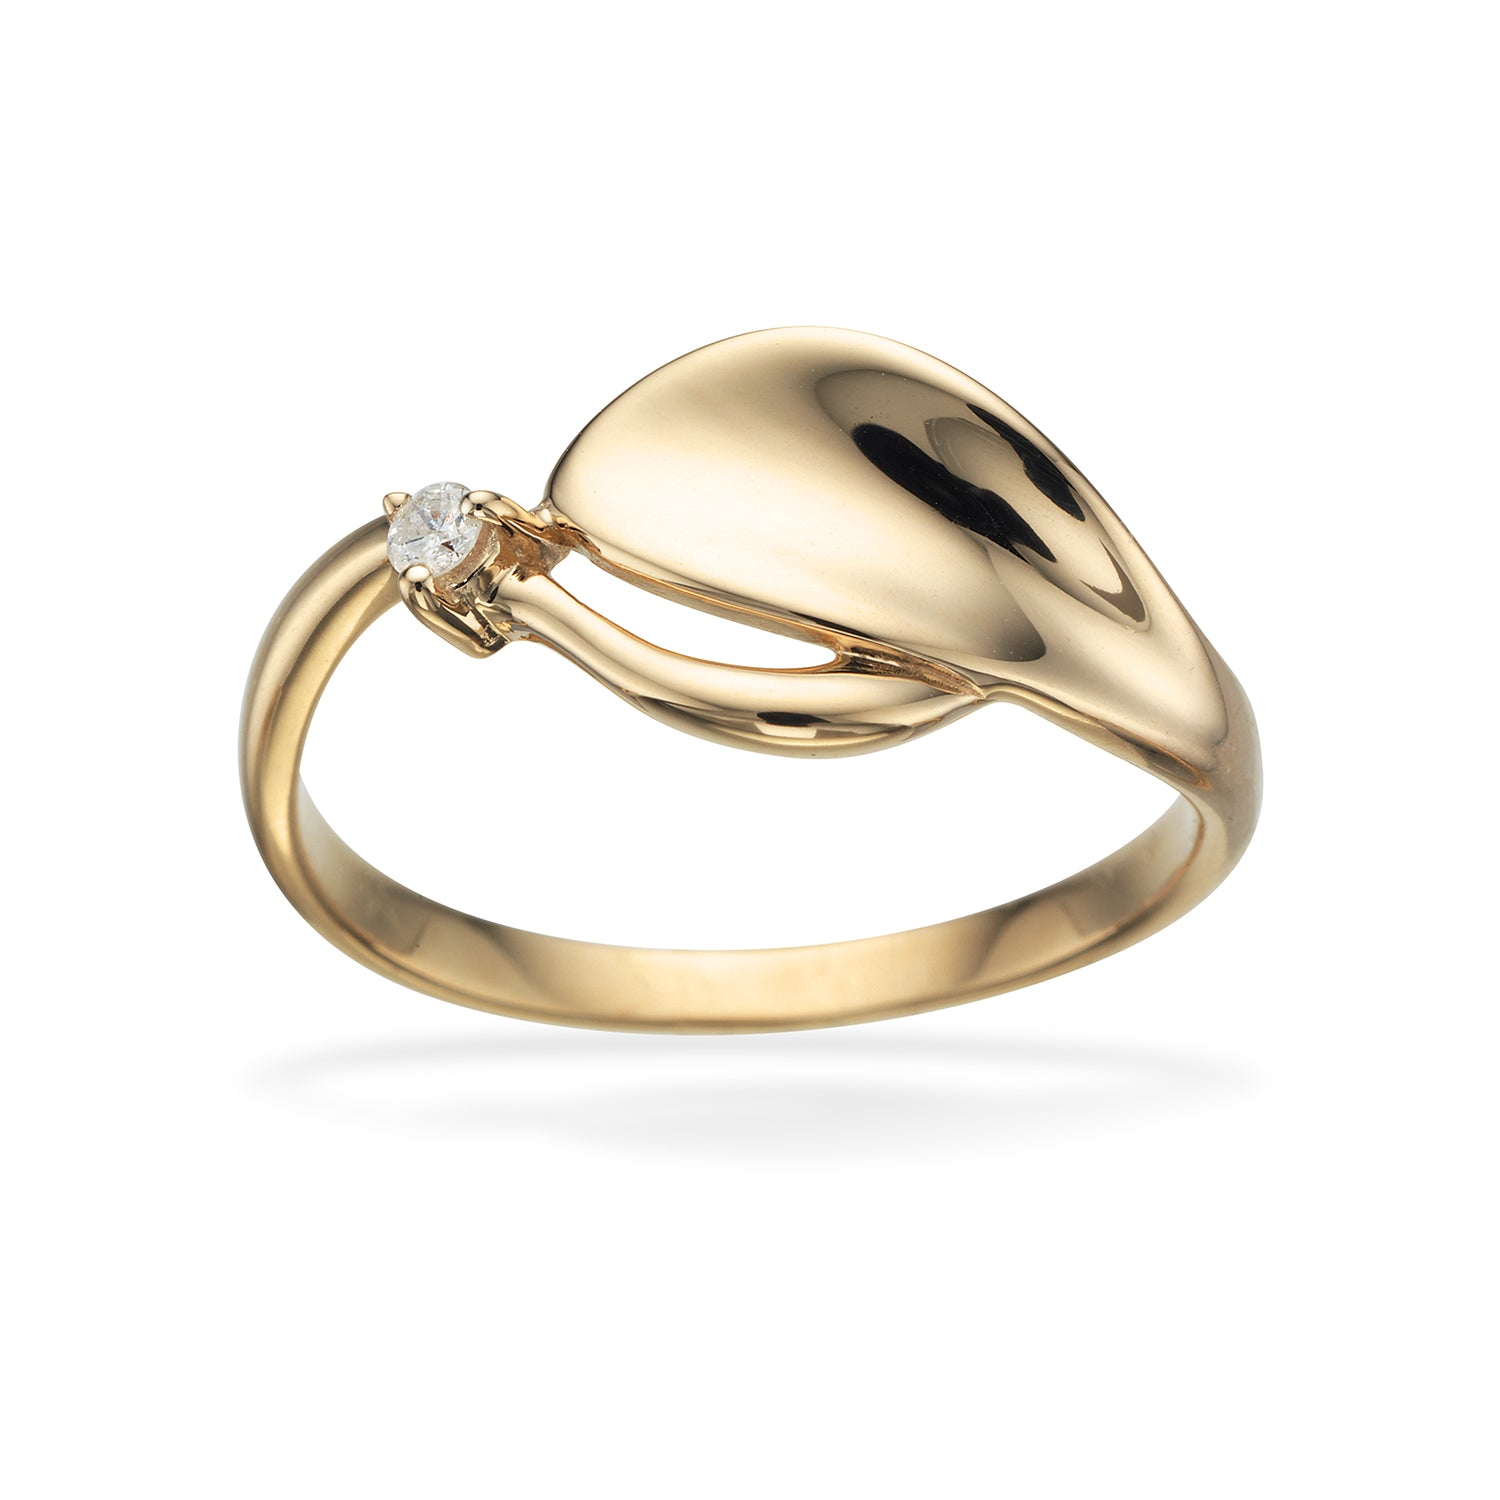 13: Scrouples - Guld ring 712445